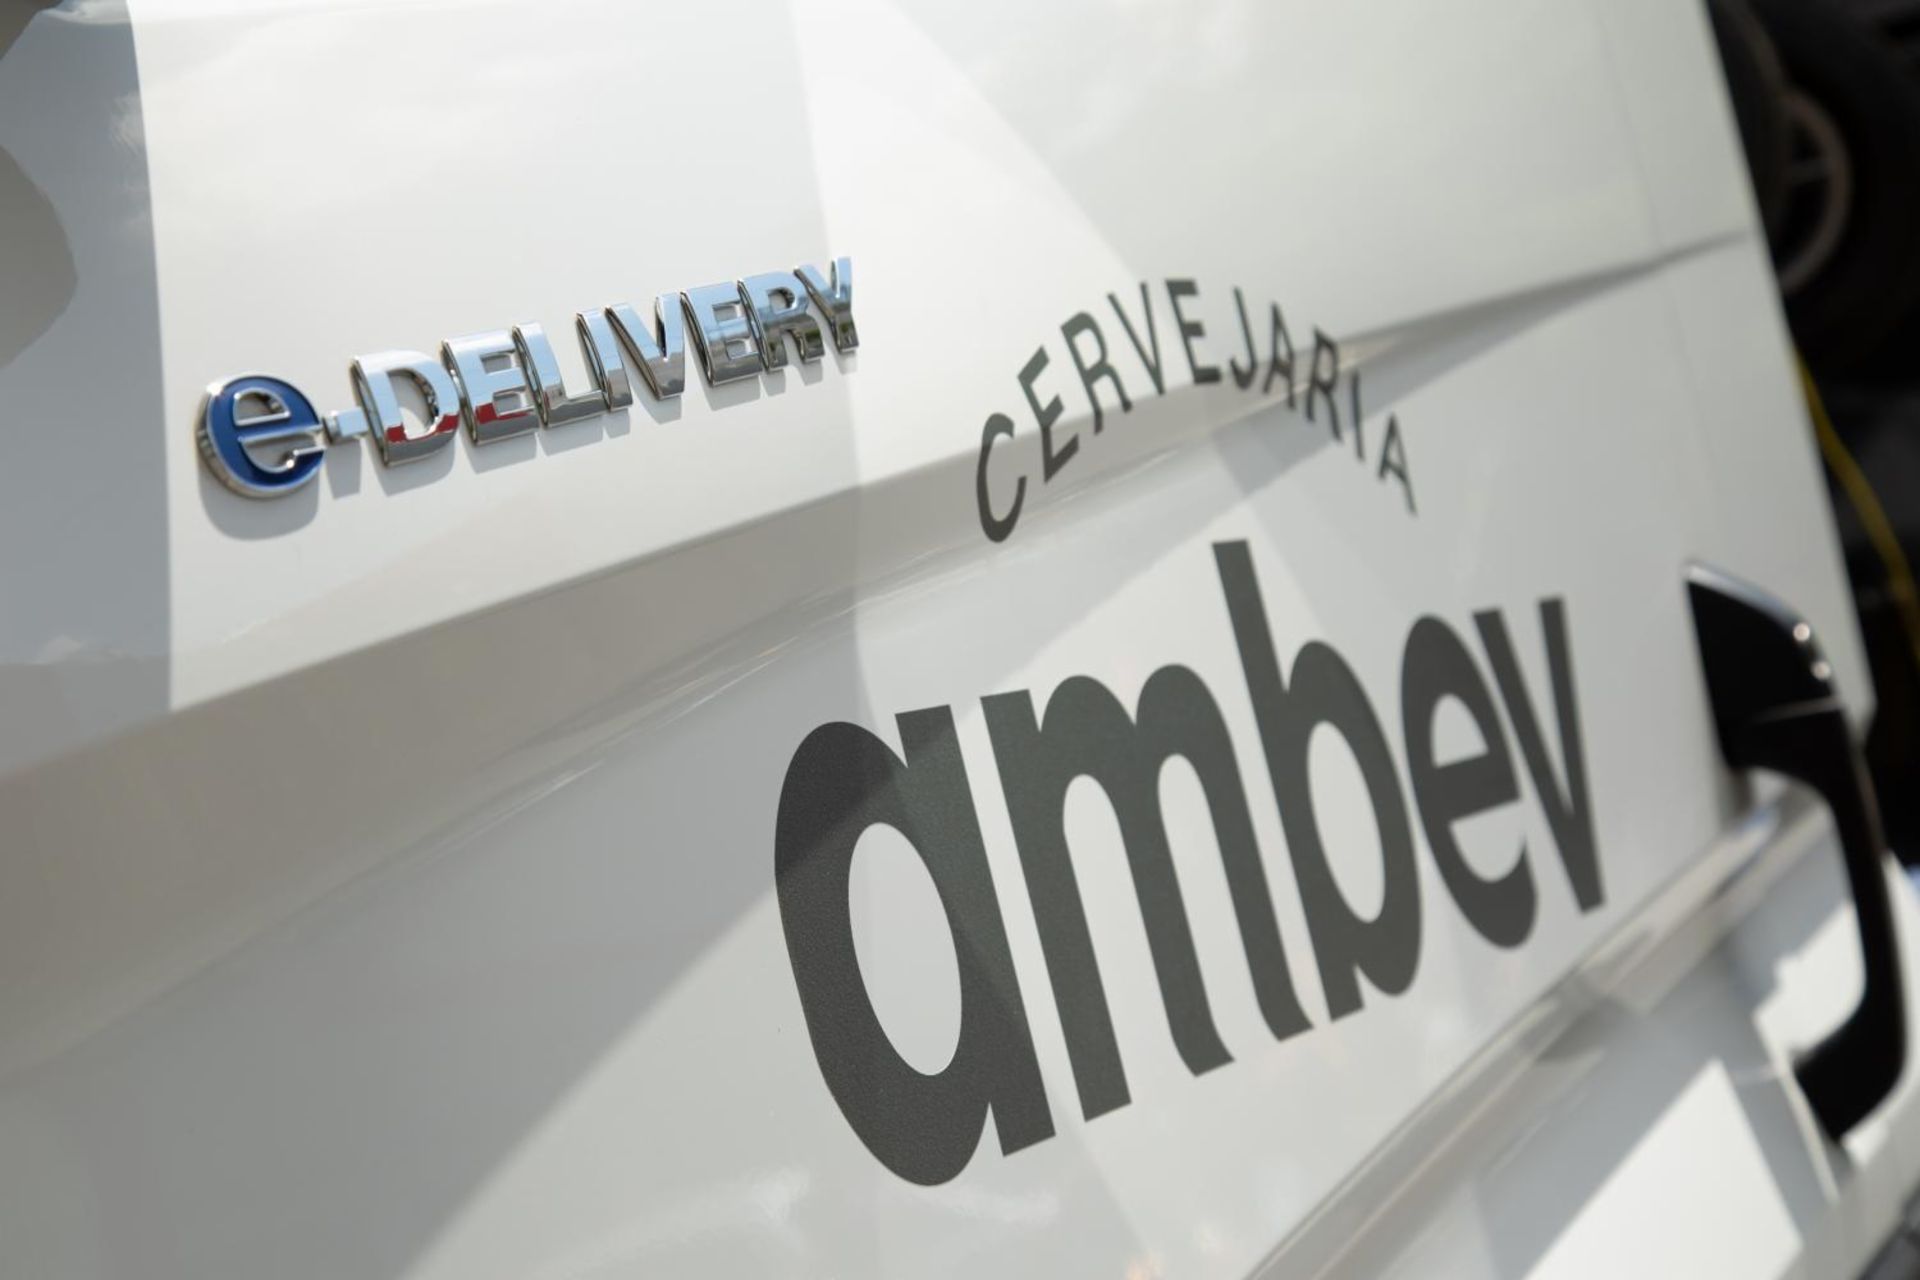 Ambev and VW Caminhões e Ônibus officially signed an agreement this week to deliver the first 100 e-Delivery electric trucks.